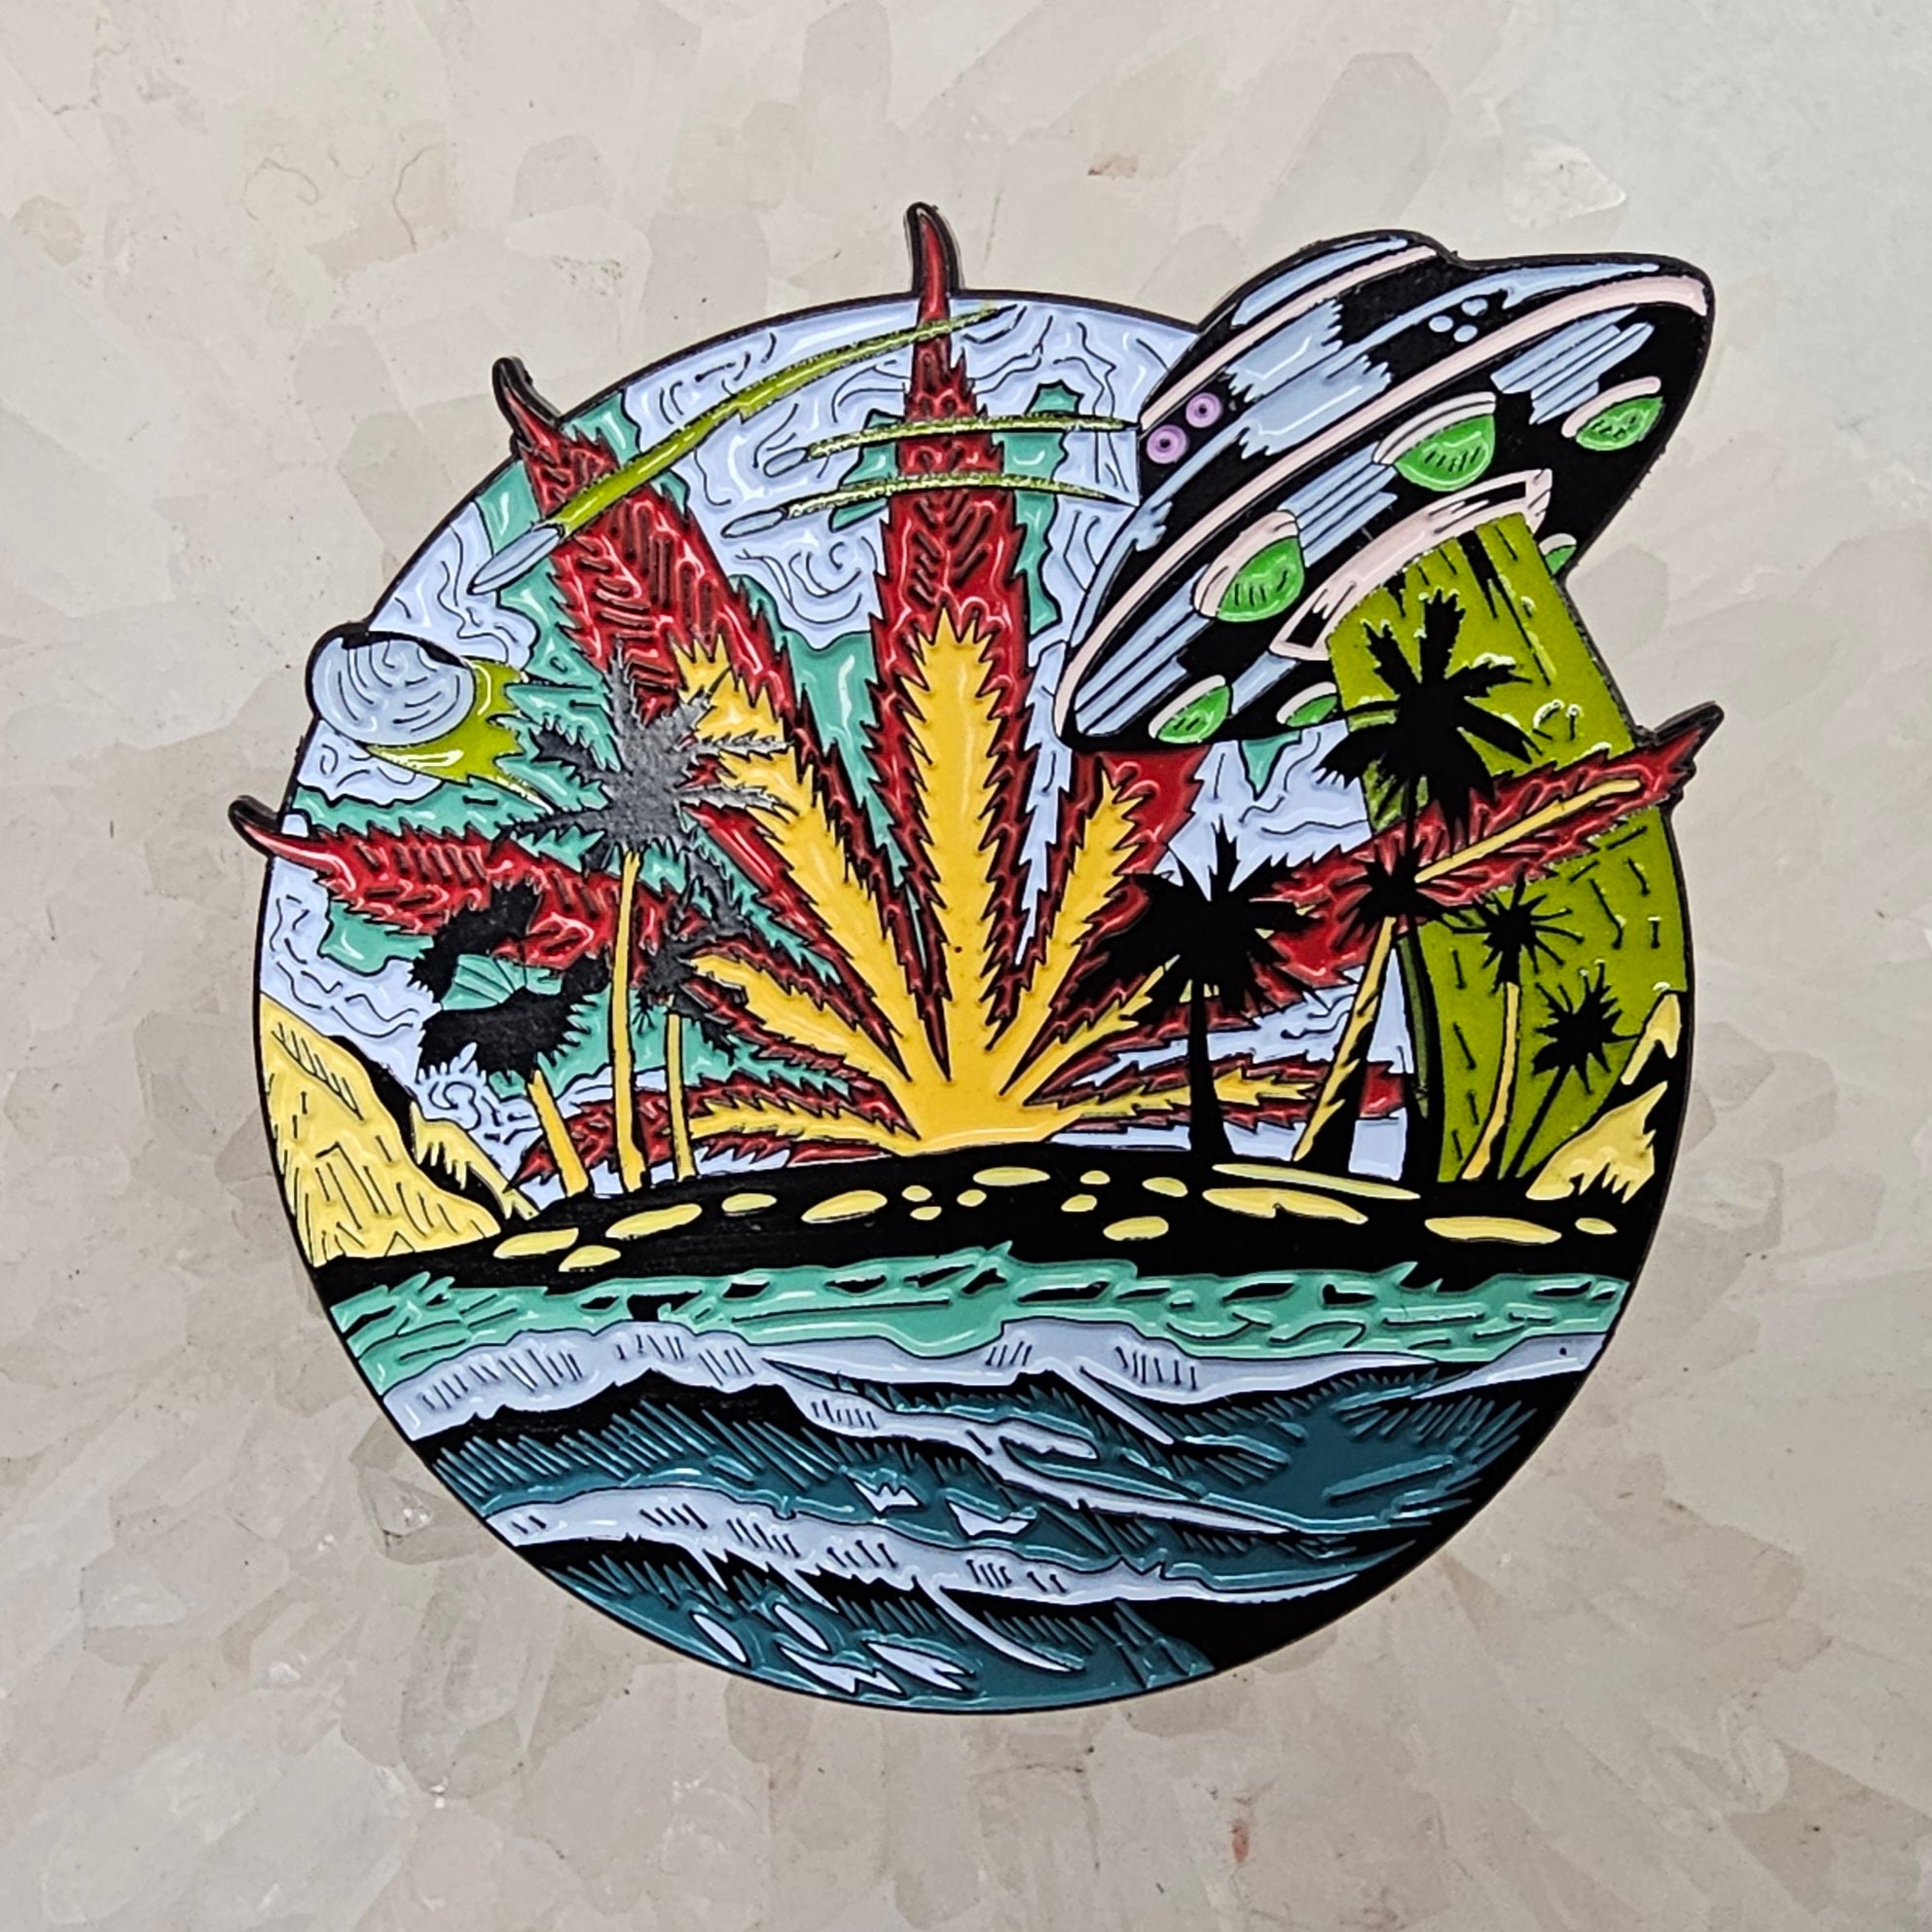 West Coast Alien Invasion Psychedelic Flying Saucer Weed Ufo Sunset Enamel Pins Hat Pins Lapel Pin Brooch Badge Festival Pin